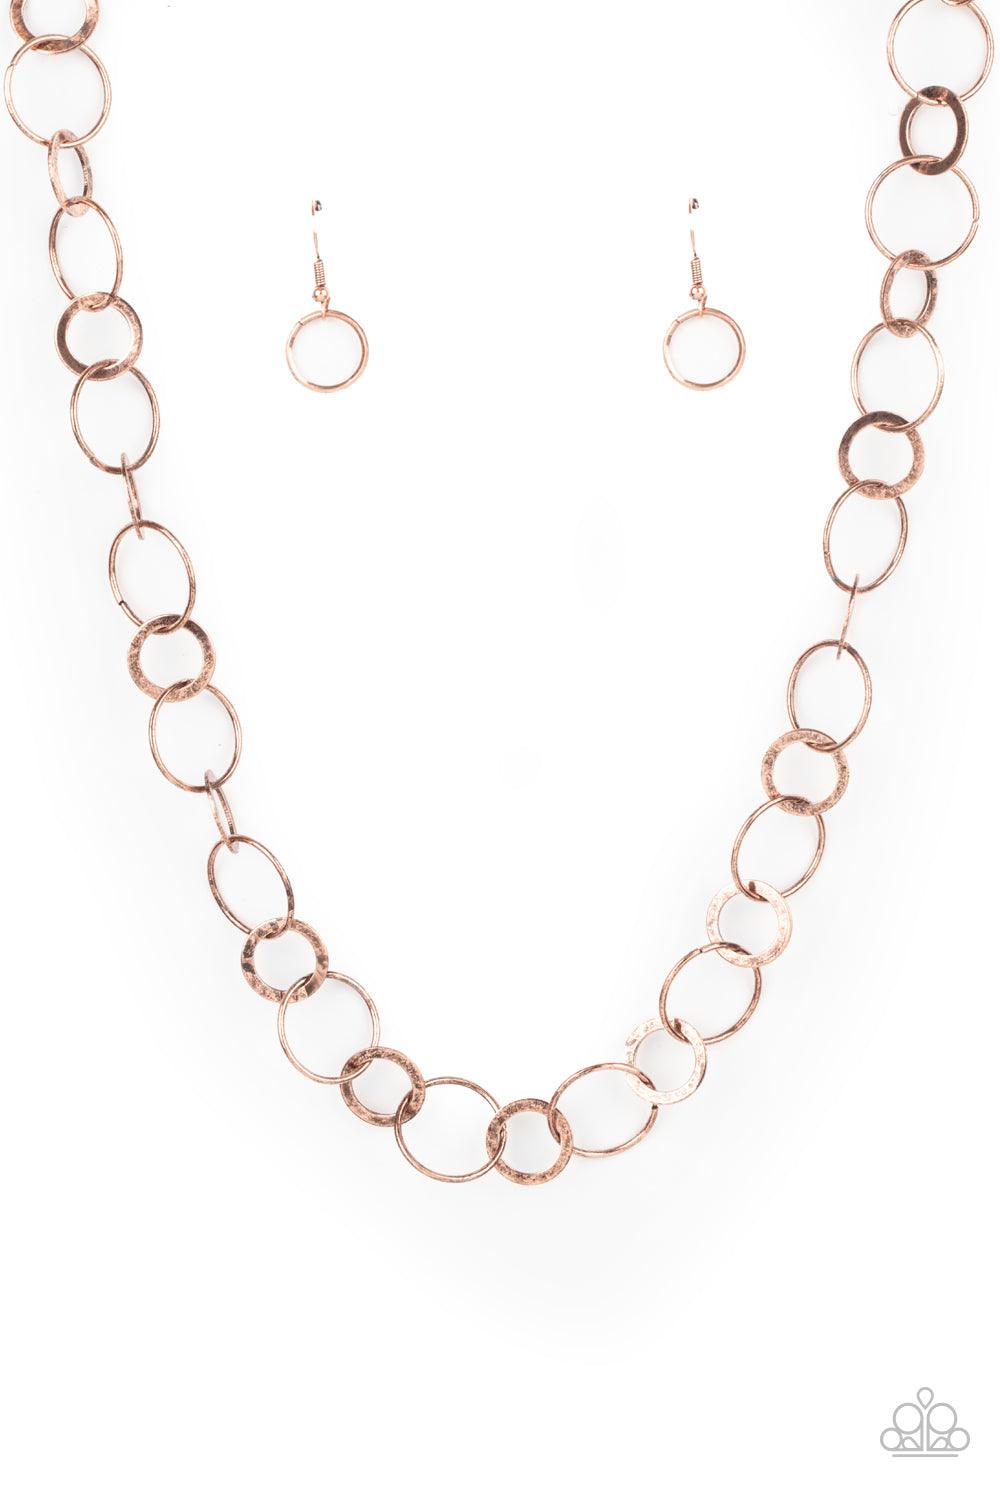 Paparazzi Accessories Revolutionary Radiance - Copper Dainty copper hoops and rustic rings delicately link into a chic chain, creating simplistic shimmer below the collar. Features an adjustable clasp closure. Sold as one individual necklace. Includes one